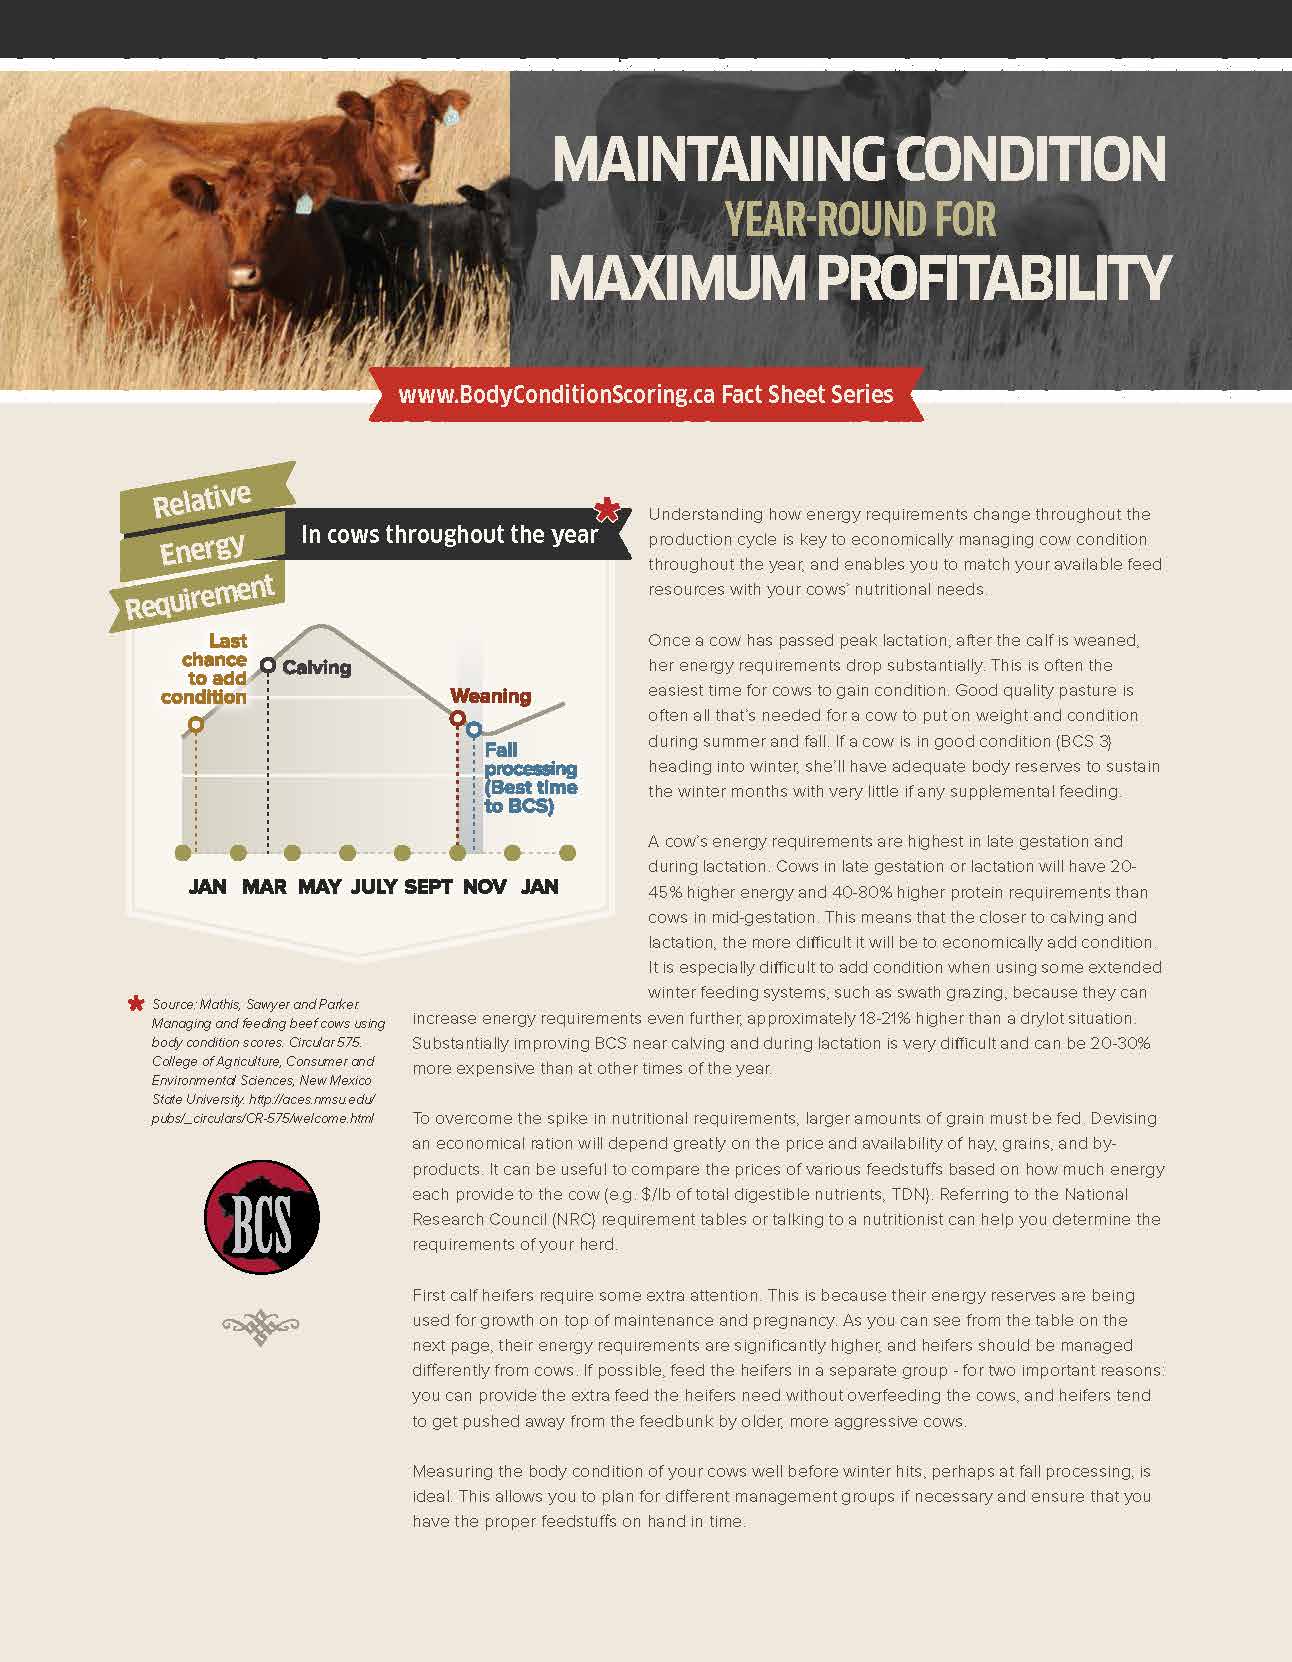 Fact sheet: Maintain Condition Year-Round for Maximum Profitability